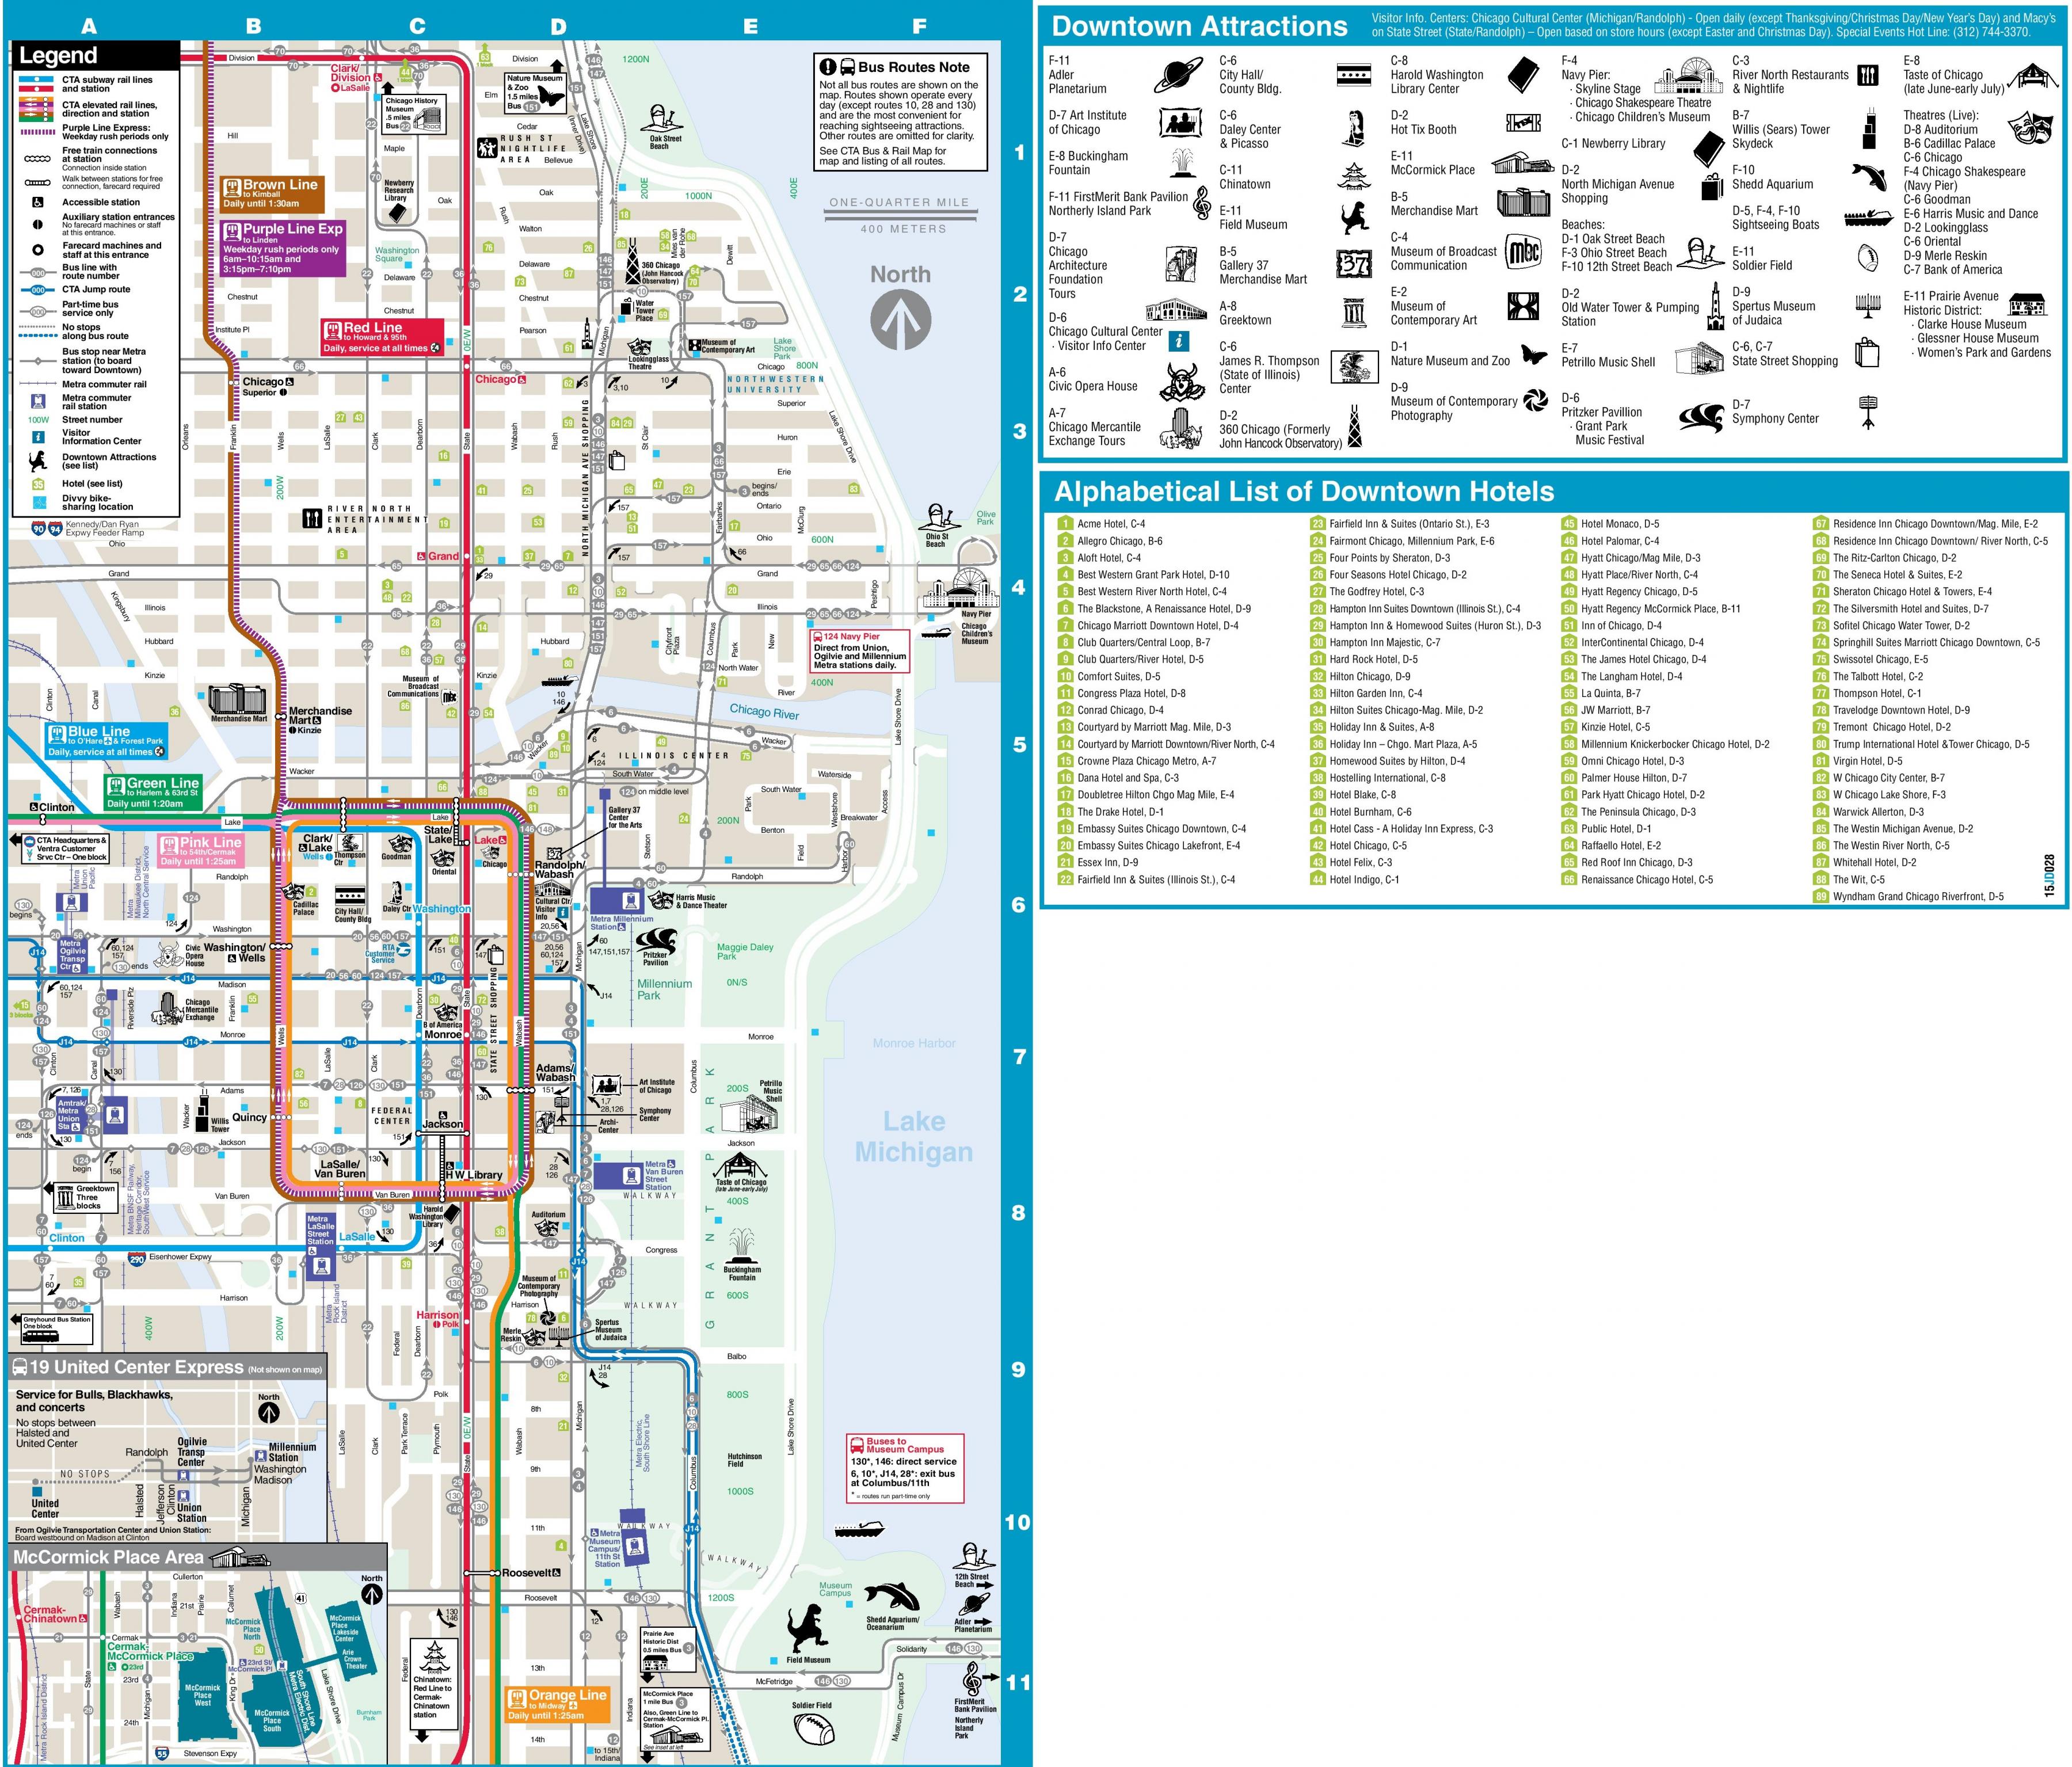 Map Of Downtown Chicago Attractions - Tony Aigneis